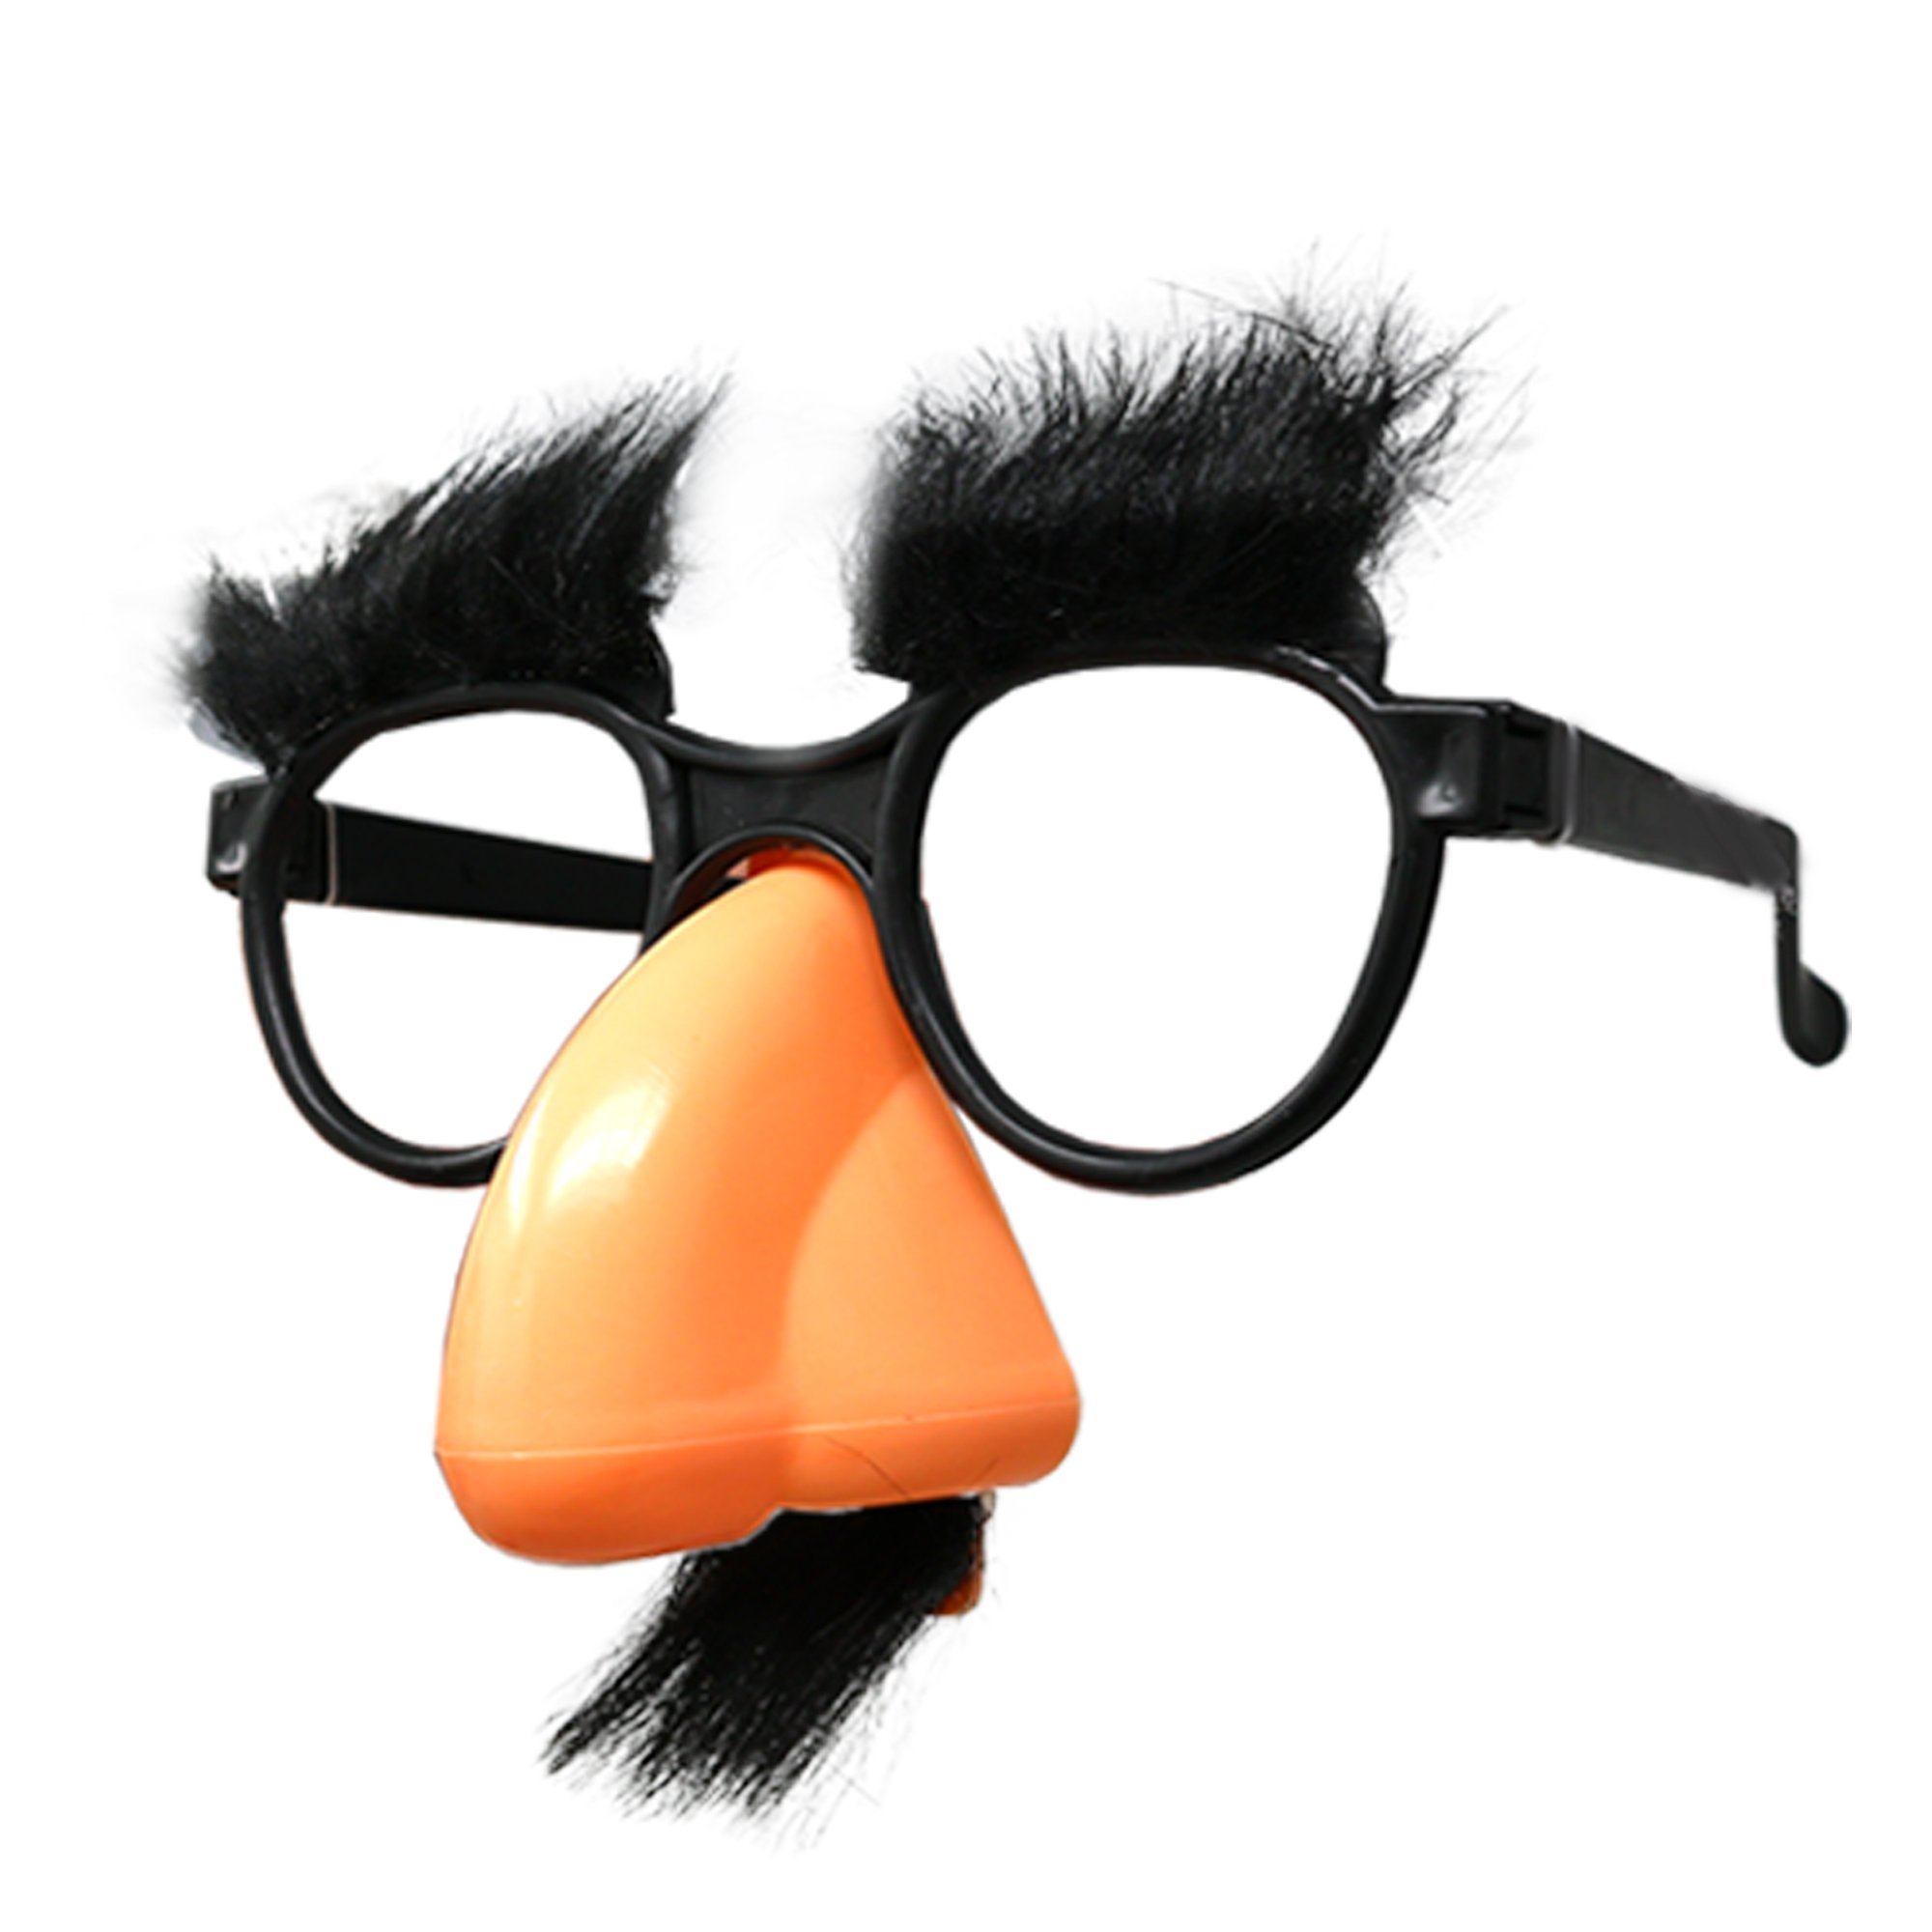 Disguise Glasses with Nose - Groucho Marx Funny Glasses - 1 Piece - image 2 of 5